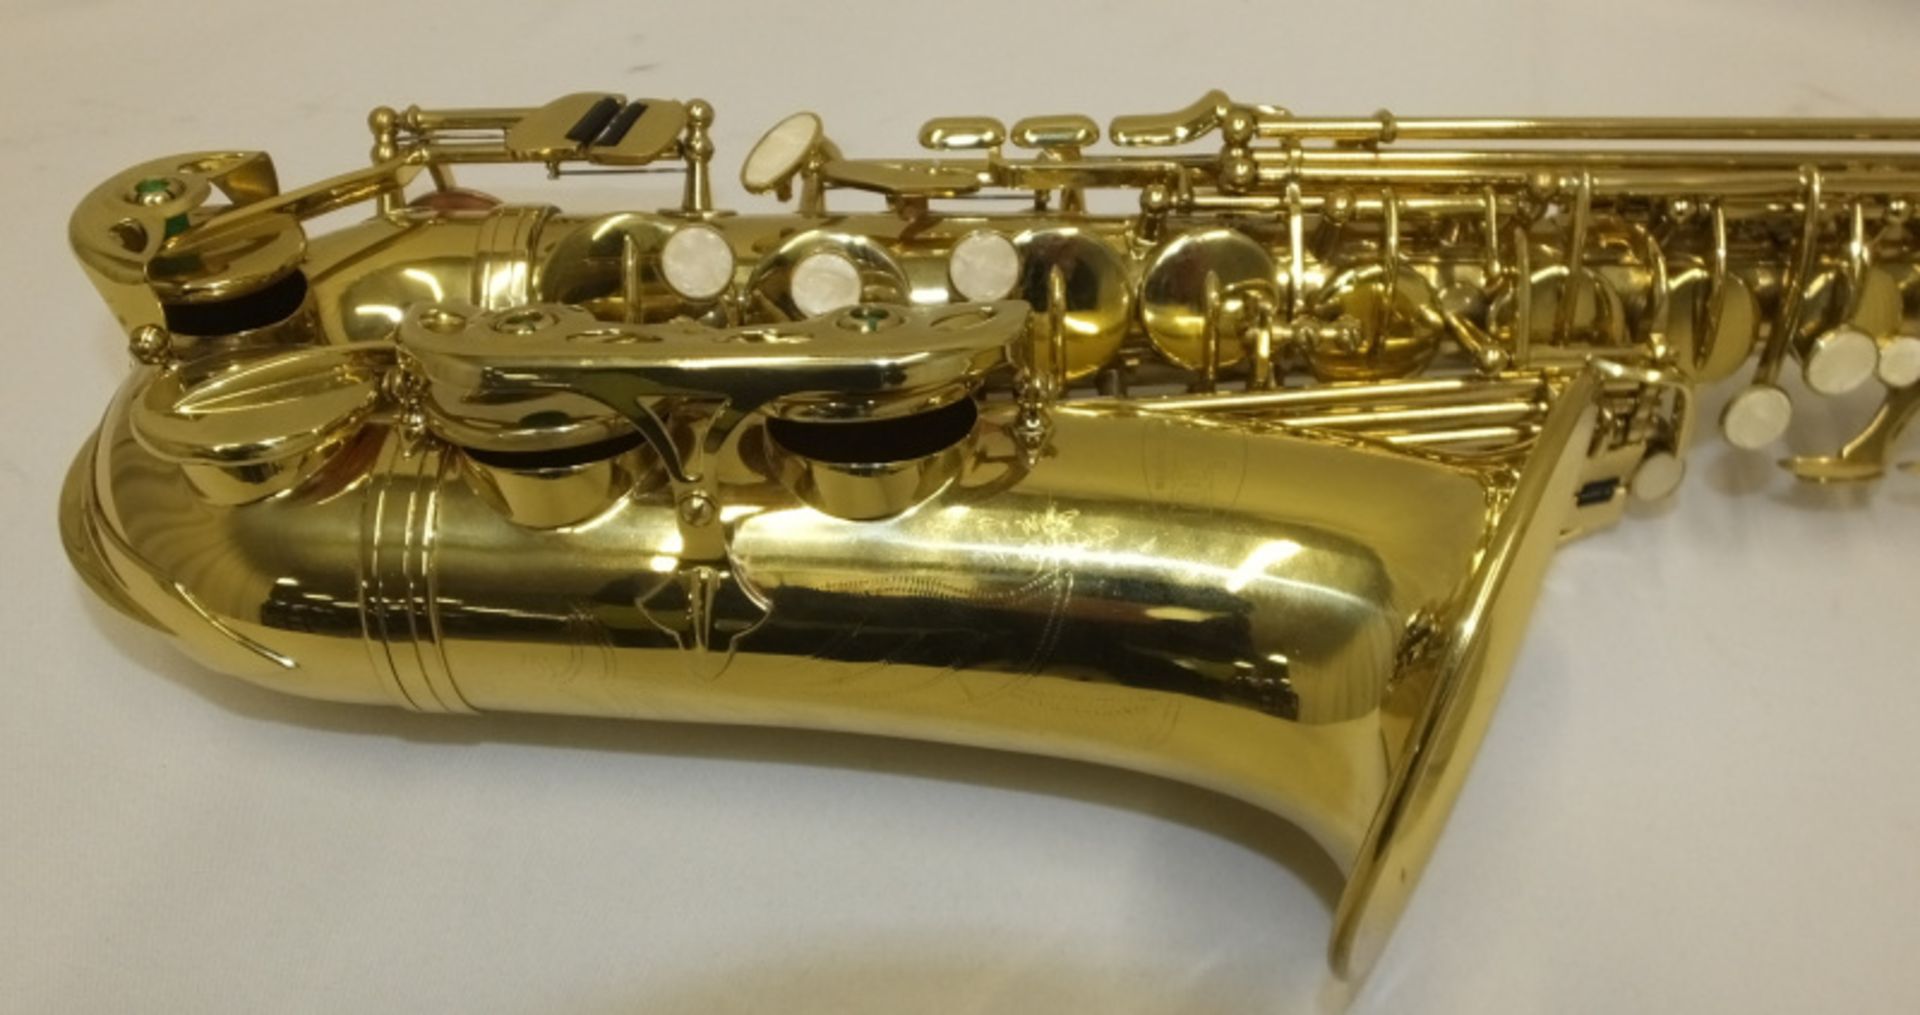 Simba Instruments Saxophone in Simba case - serial number 20960603 - Please check photos carefully - Image 7 of 16